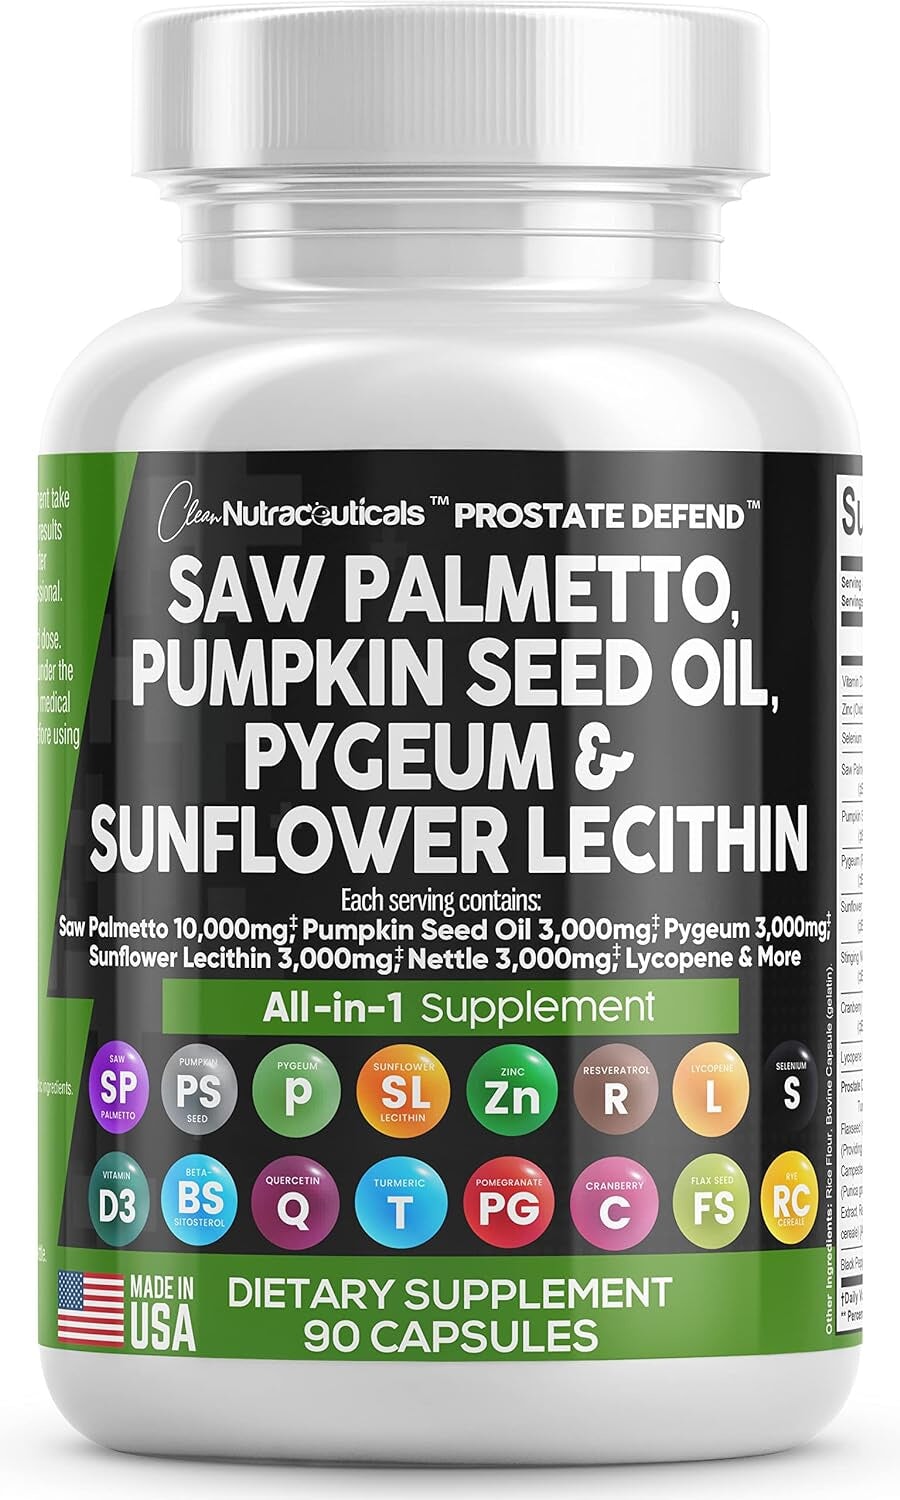 Clean Nutraceuticals Saw Palmetto 10000mg Pumpkin Seed Oil 3000mg Pygeum Sunflower Lecithin Stinging Nettle Cranberry - Prostate Supplements for Men General Not specified 